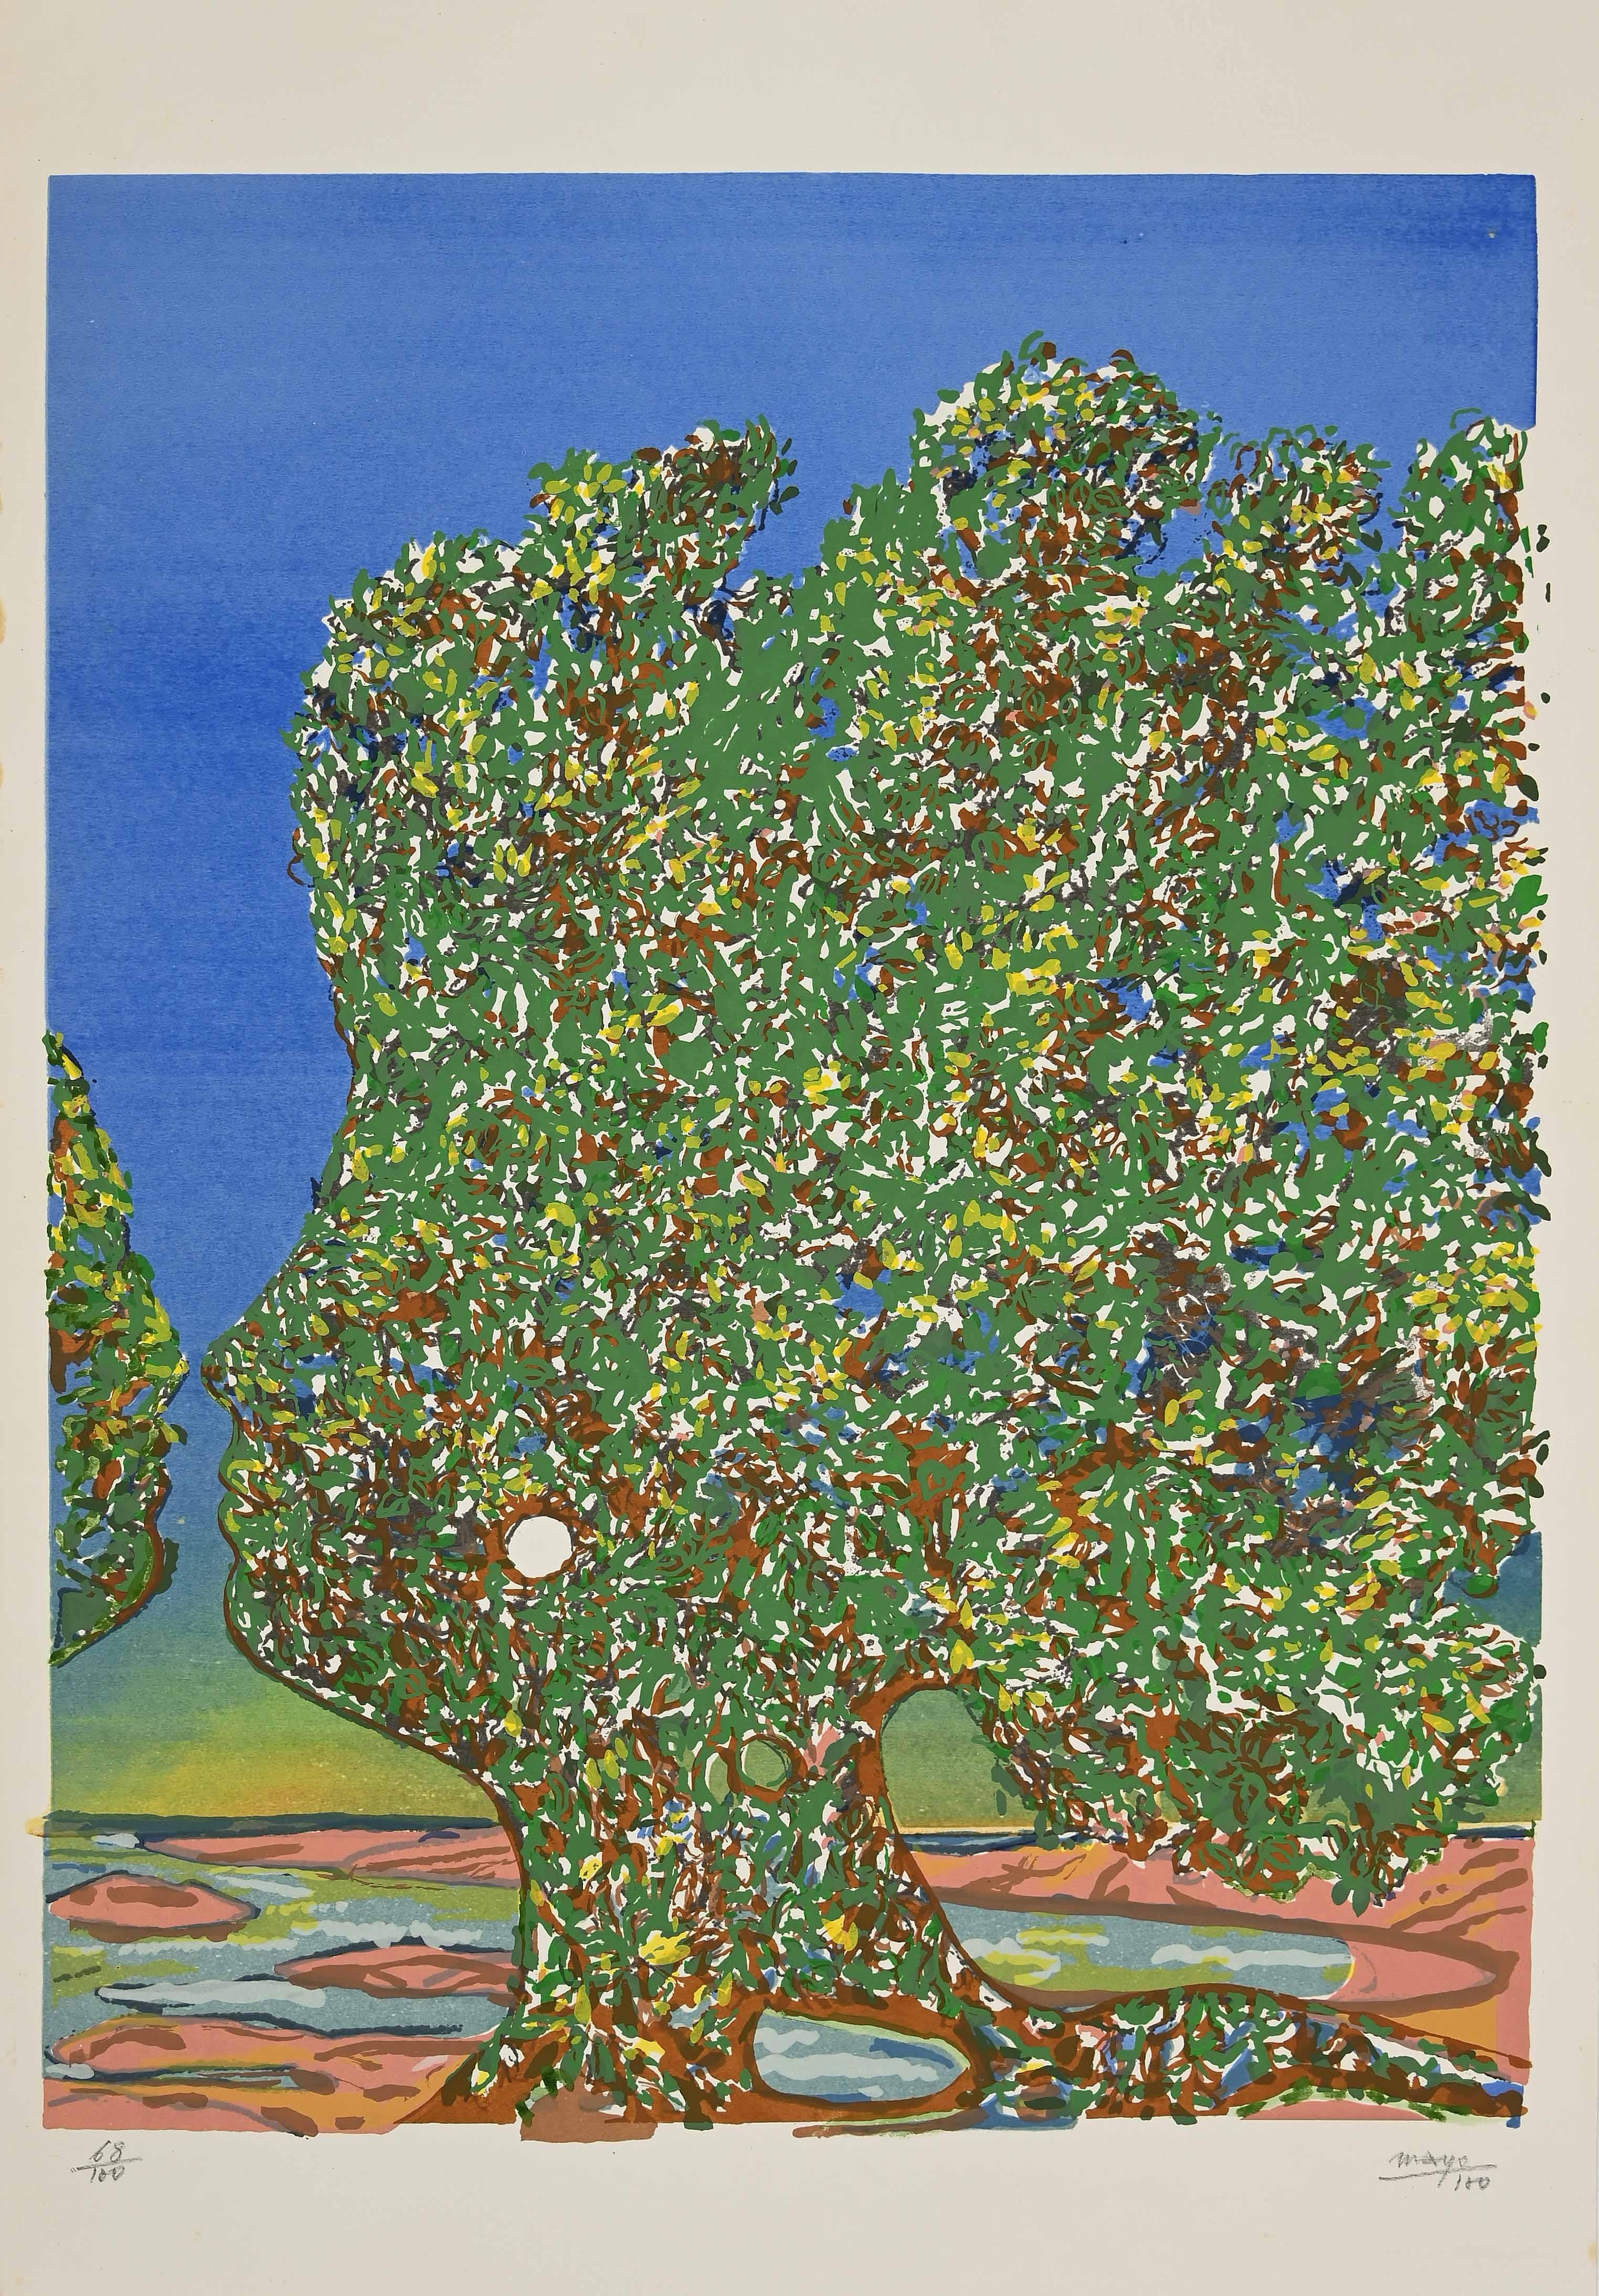 Mayo (Antoine Malliarakis) Print - L'Arbre de l'Amour (The Tree of Love) - Original Lithograph by Mayo - 1980